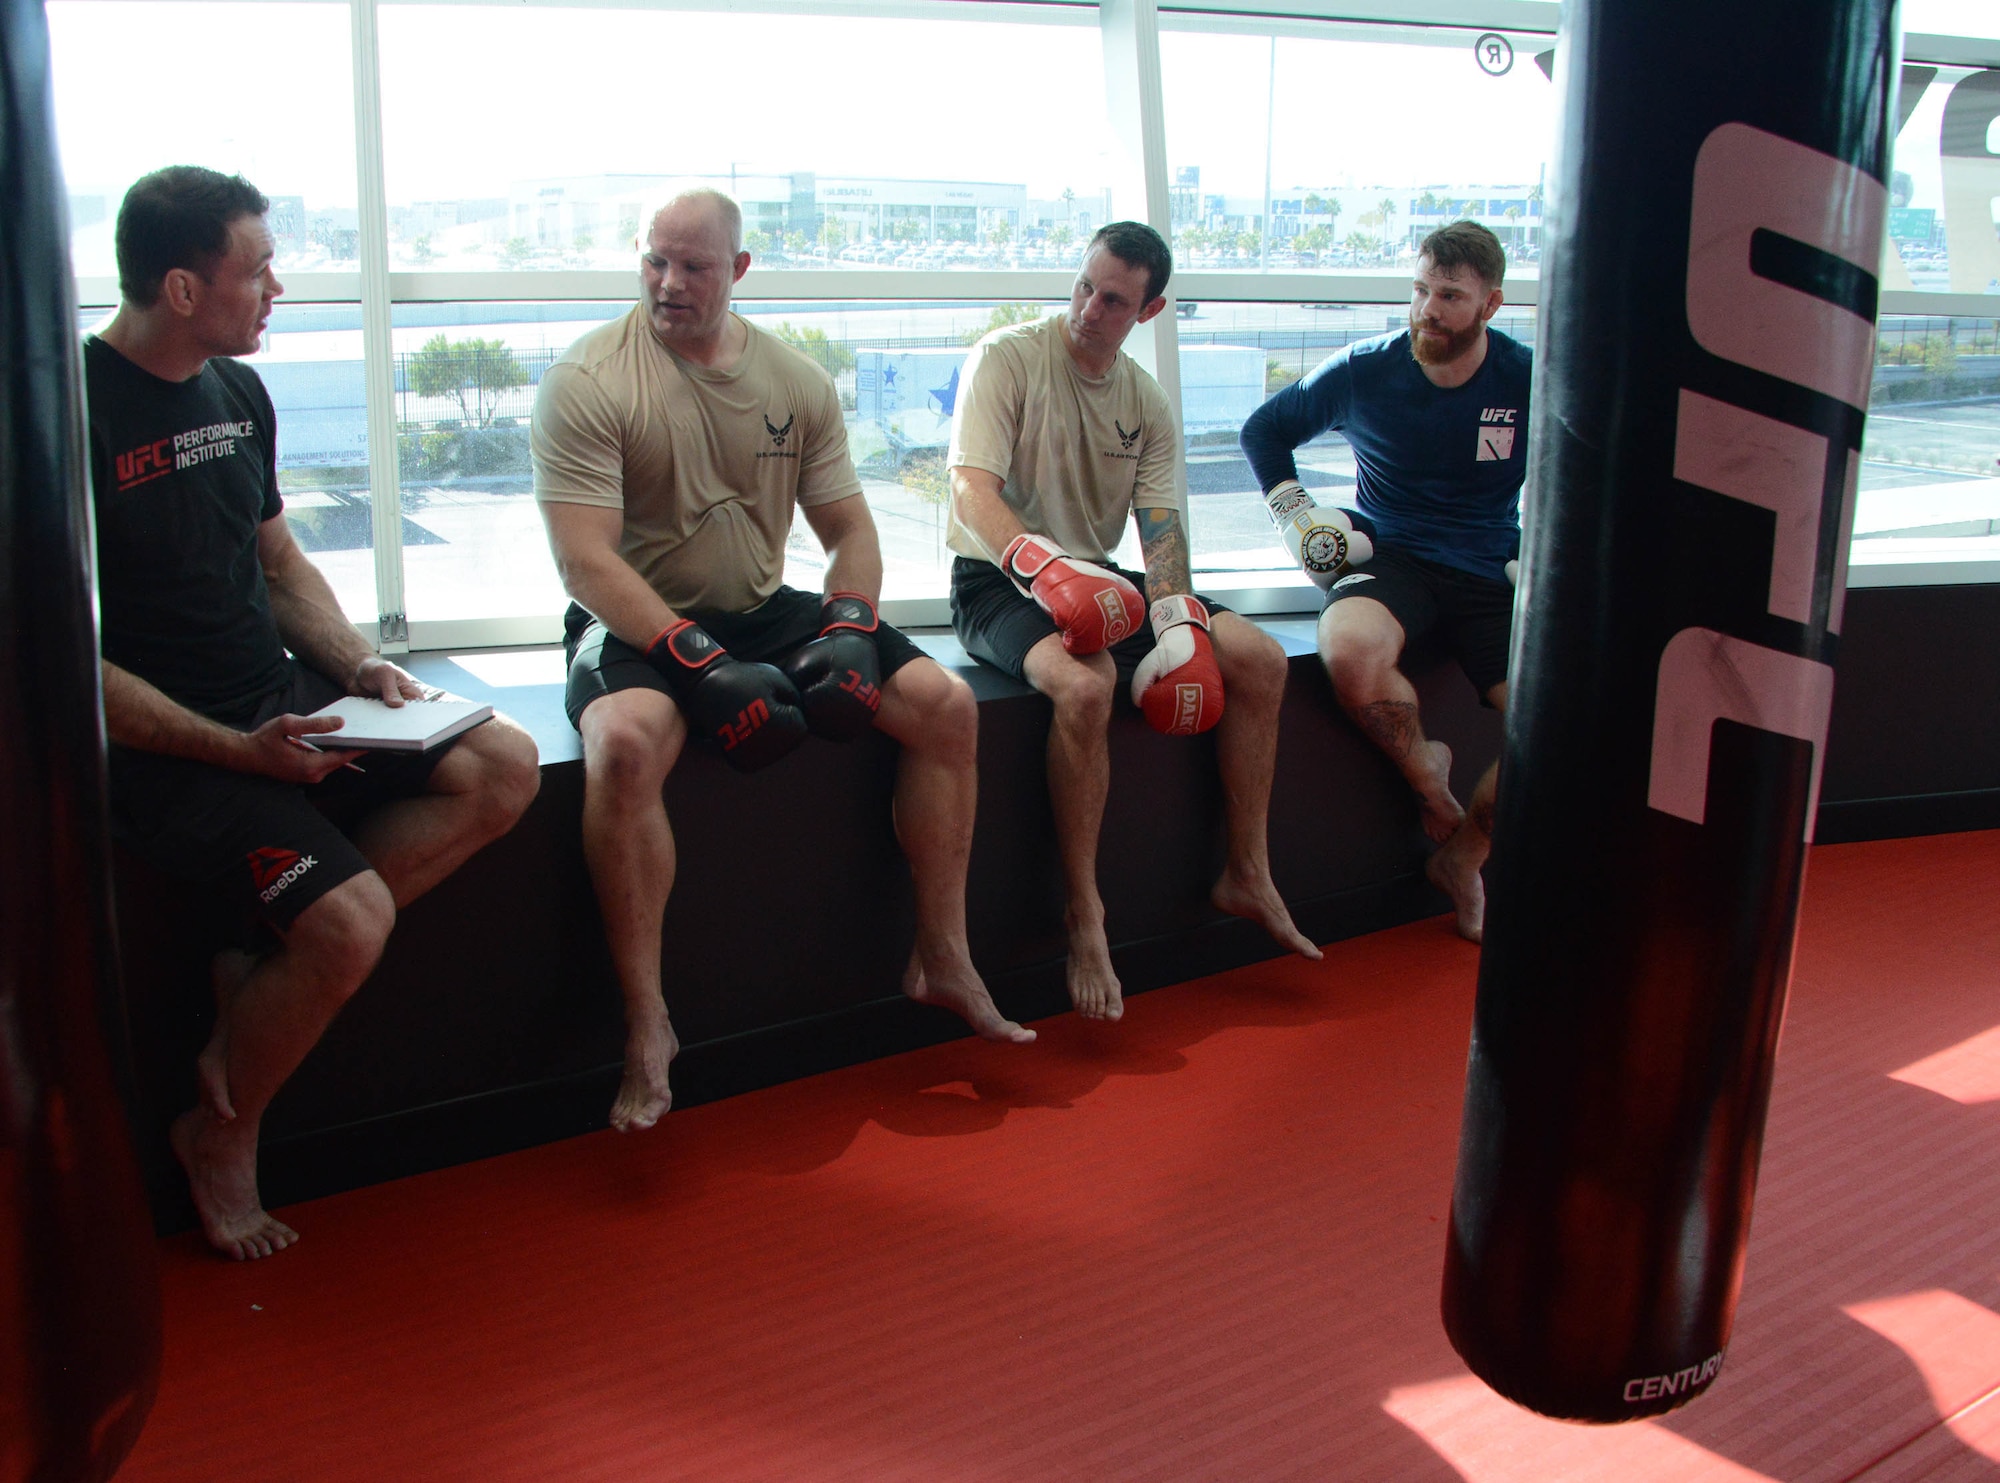 Special warfare Airmen and UFC fighters Forrest Griffin (left) and Paul Felder (right) discuss their workout during a production at the Ultimate Fighting Championship Performance Institute in Las Vegas, Nevada.